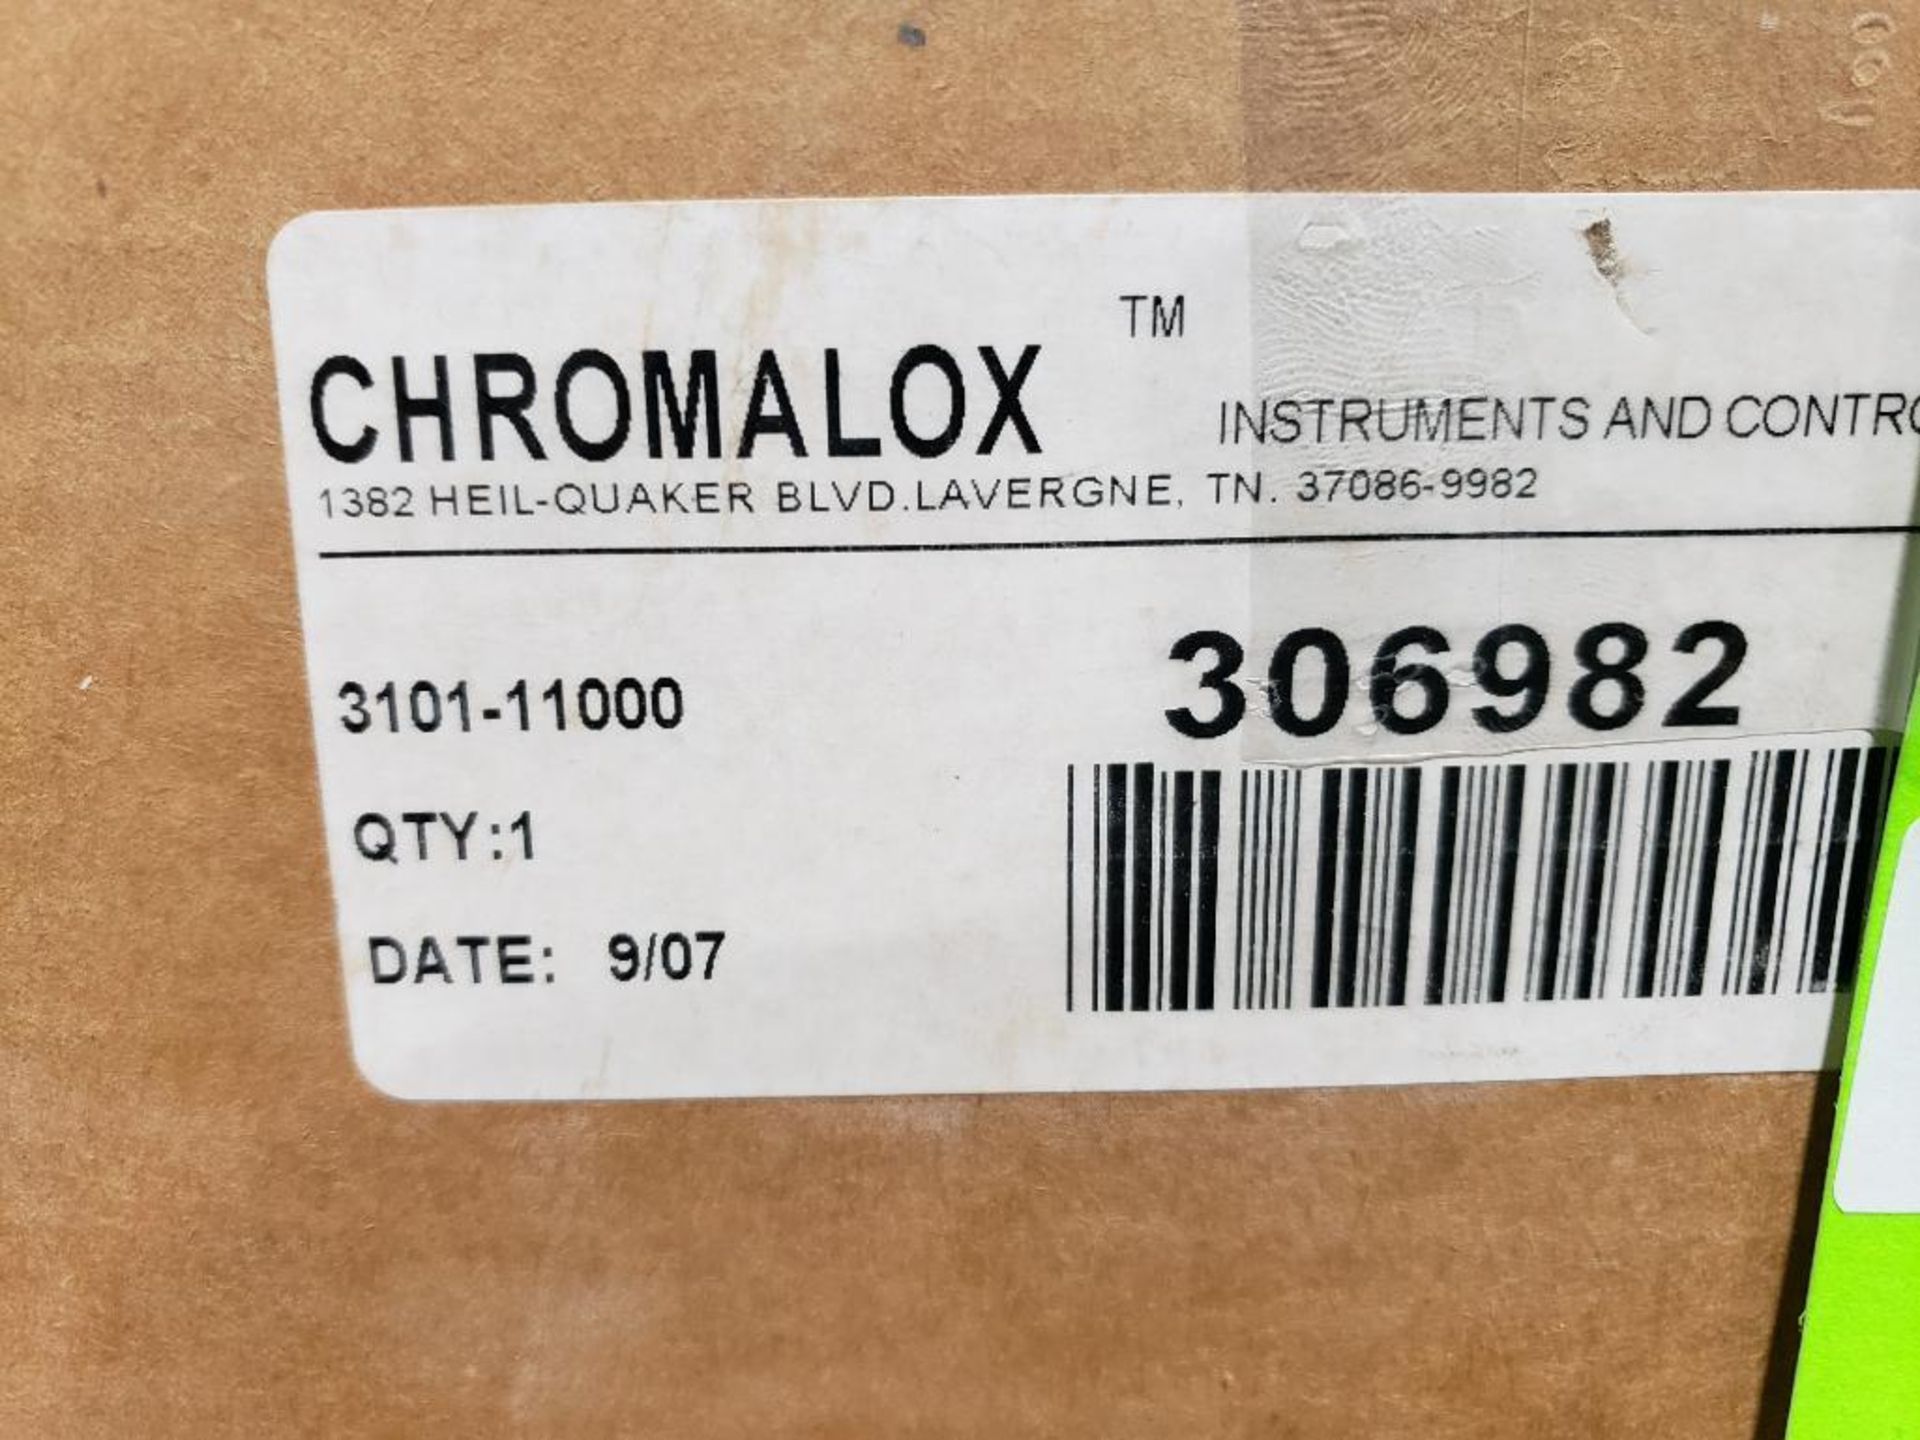 Chromalox controller. Model 3101-11000. Appears to be new in box. - Image 4 of 4